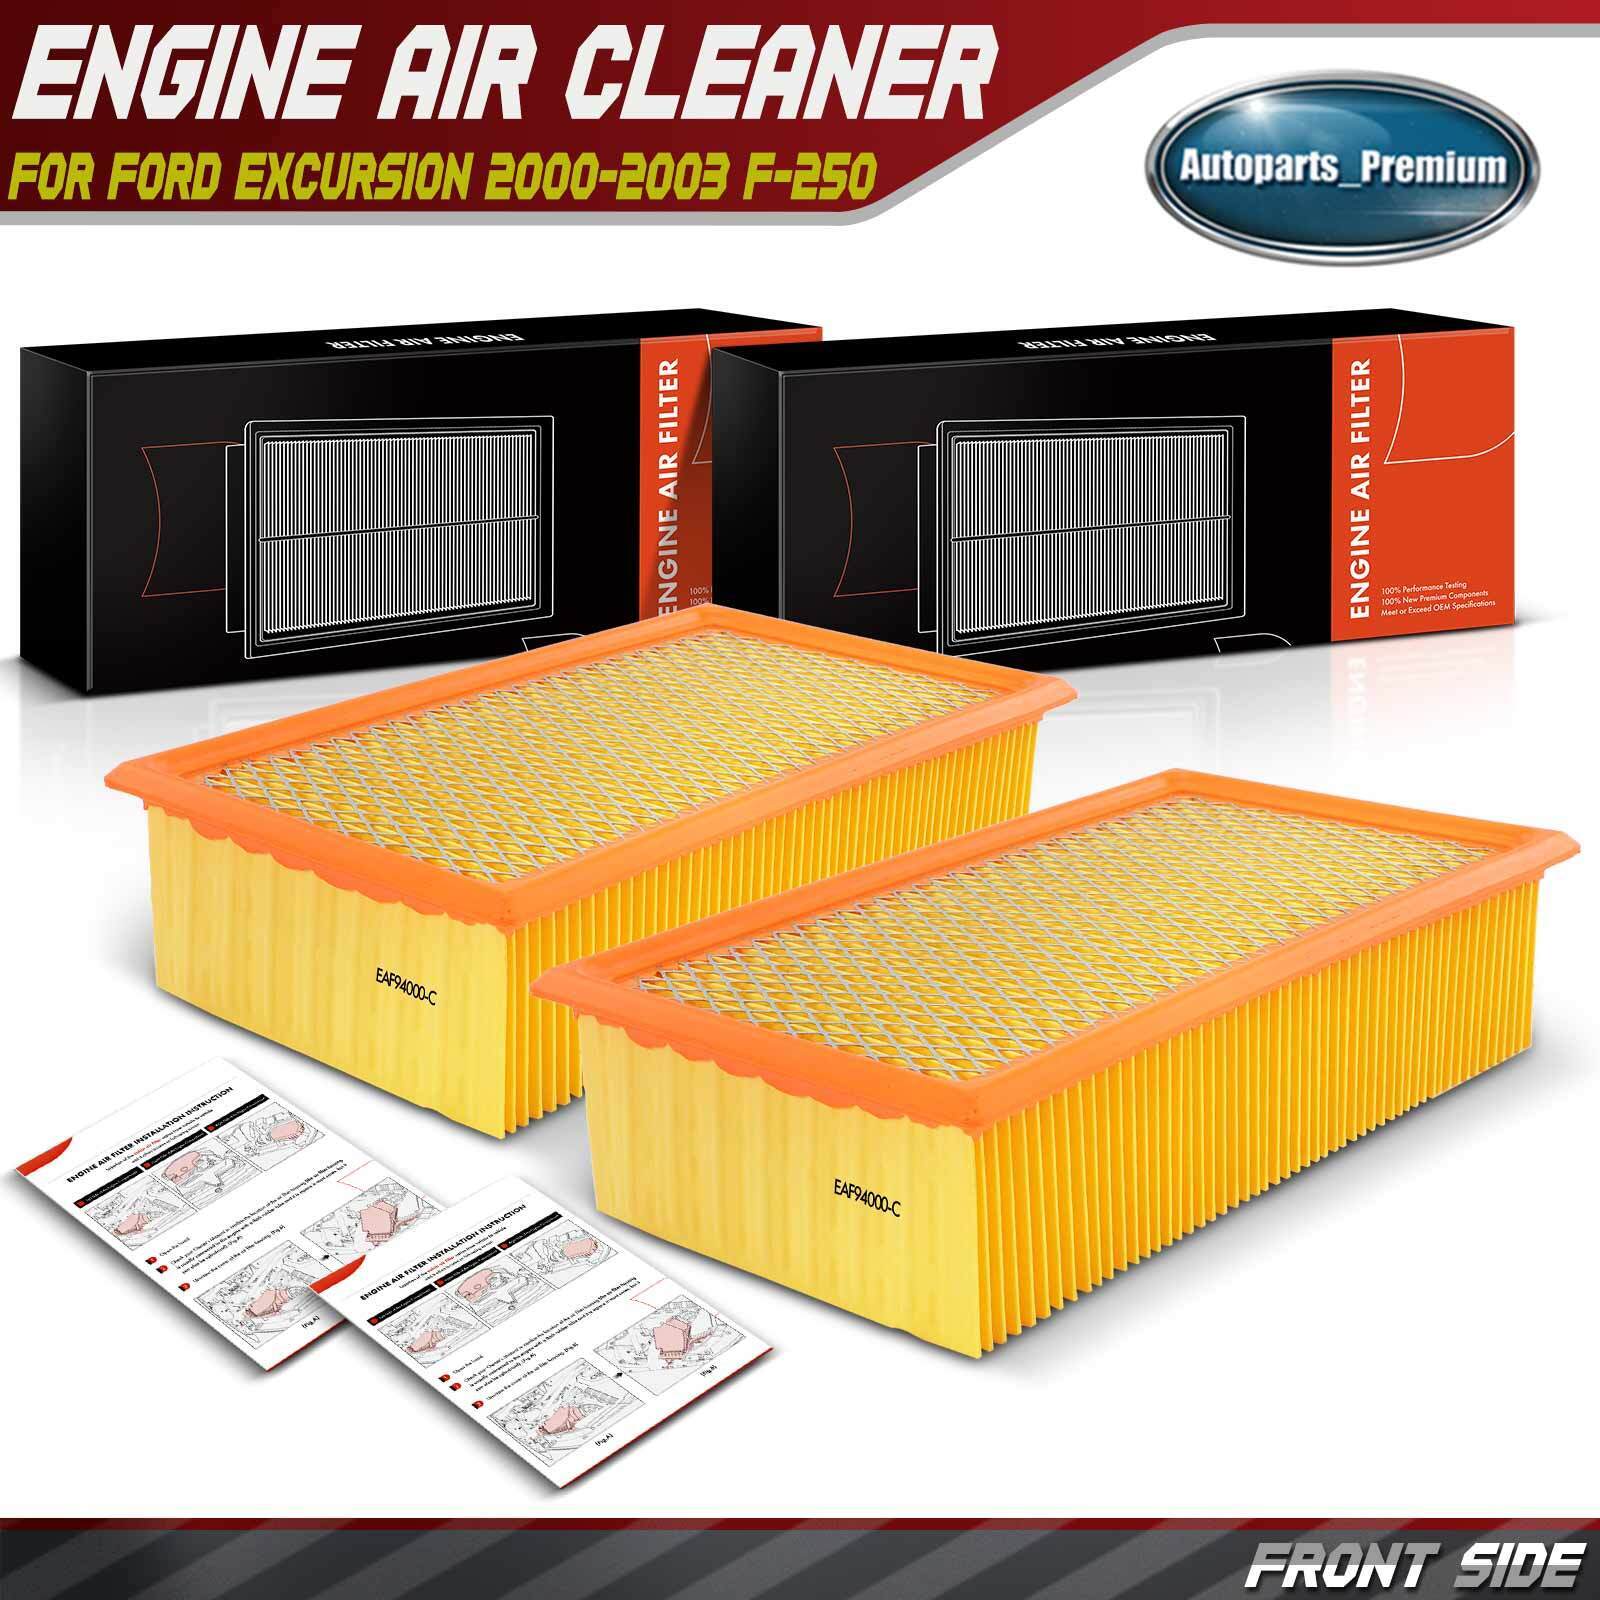 2x Engine Air Filter for Ford Excursion 2000-2003 F-250 350 450 550 Super Duty